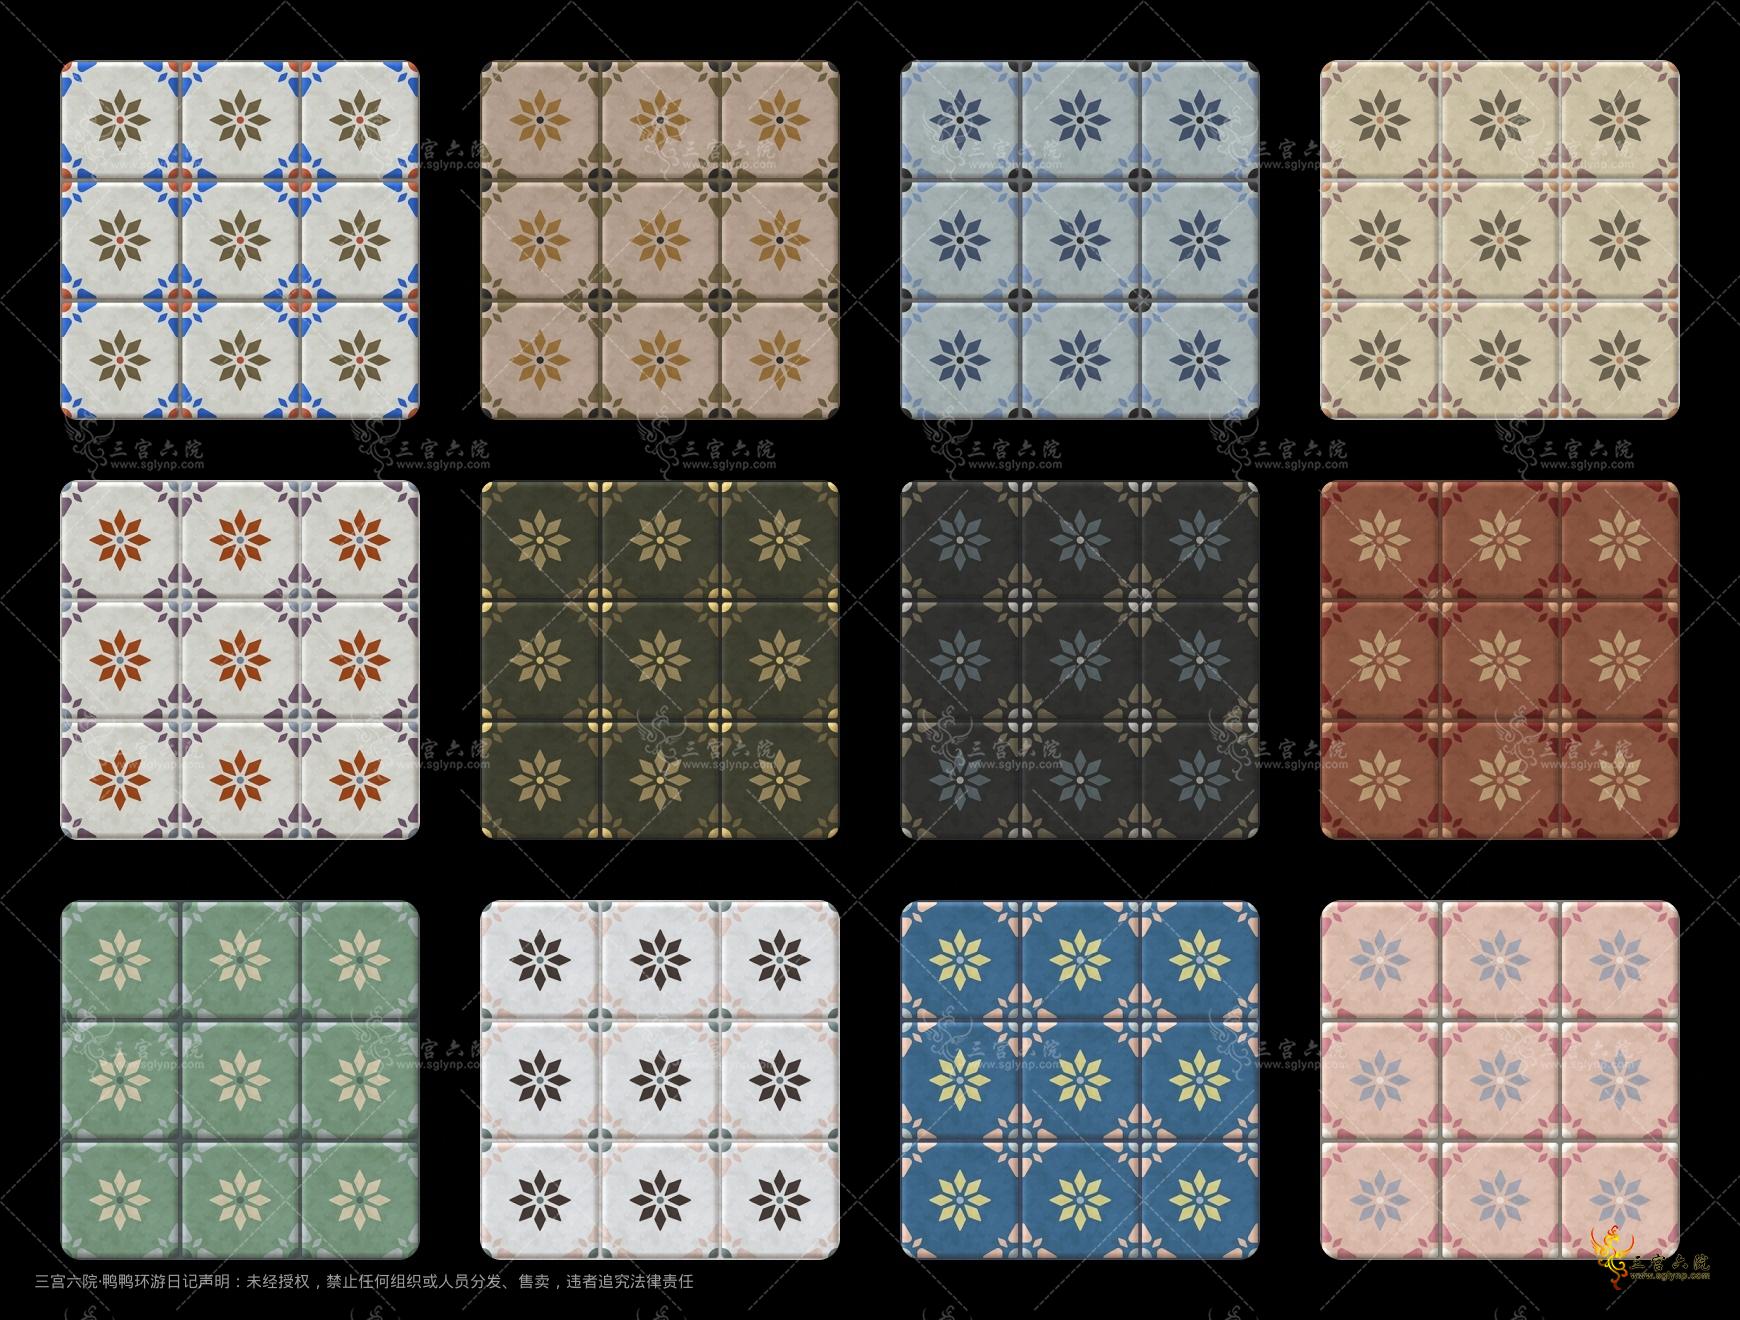 floral_tiles_all_swatches.png